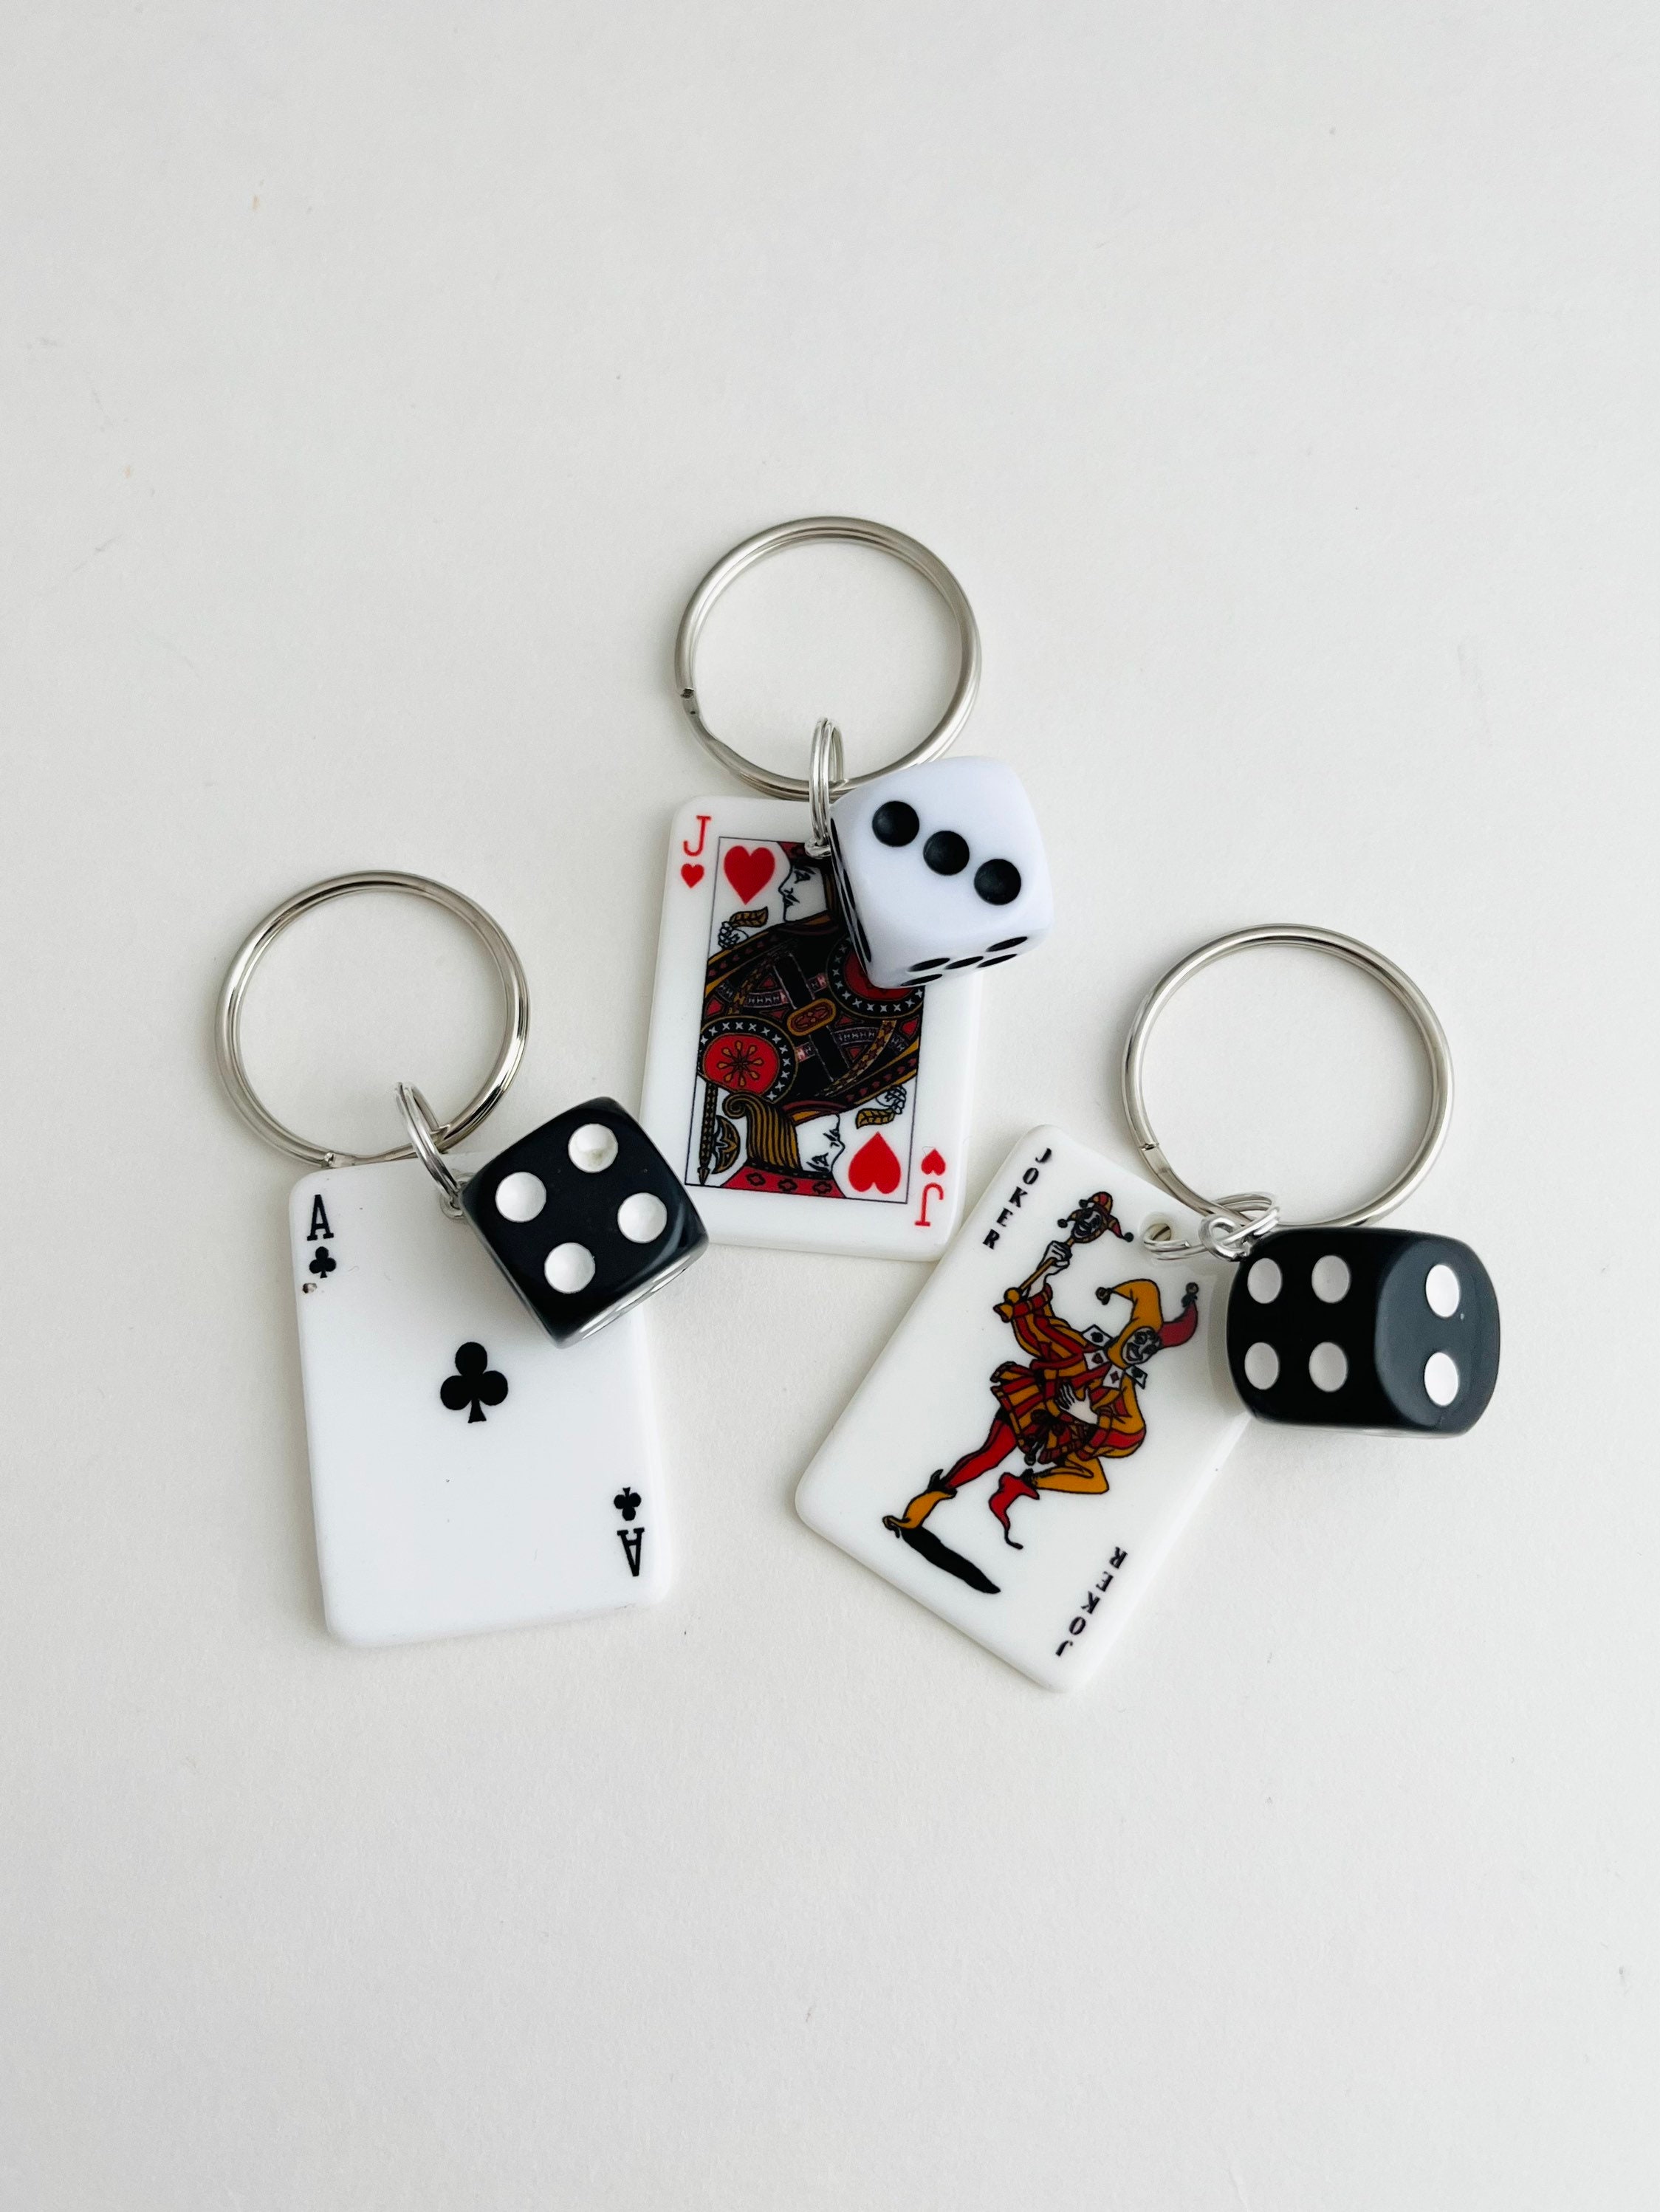  Lucky Dice Royal Flush Deck of Playing Cards Charm Bracelet,  Necklace, Keychain, Jewelry Gift : Handmade Products